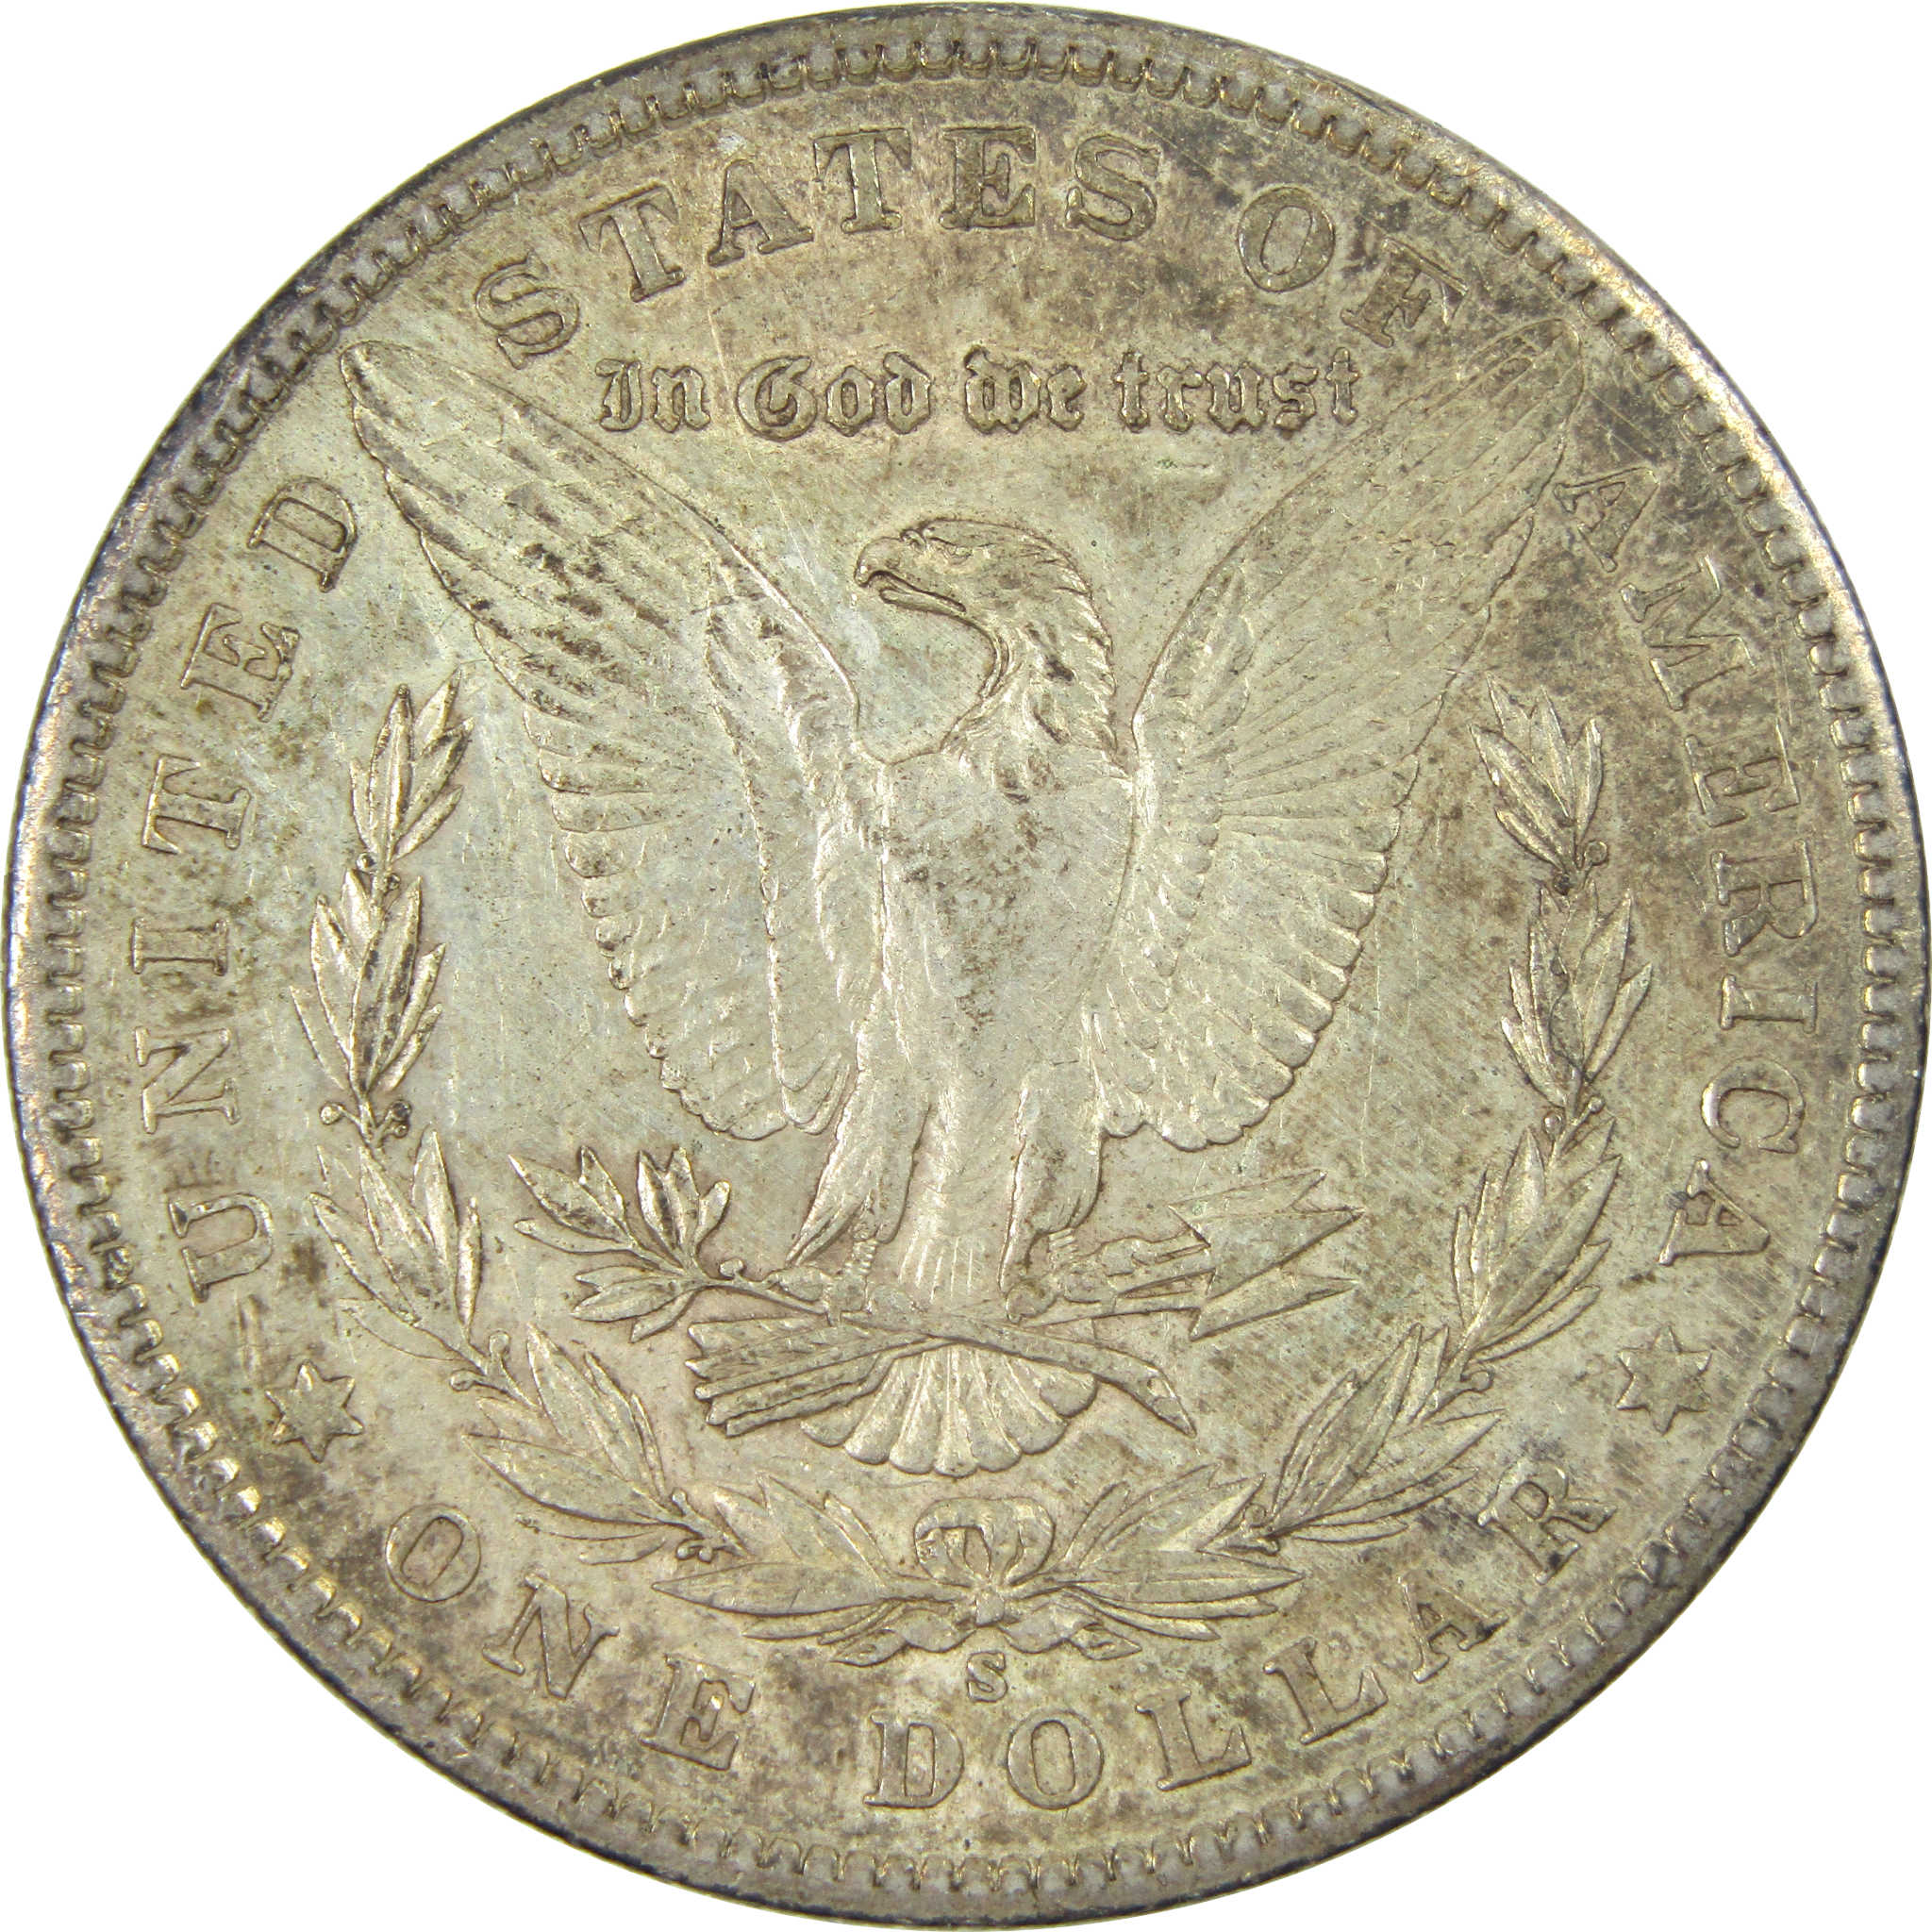 1900 S Morgan Dollar AU About Uncirculated Silver $1 Coin SKU:I13679 - Morgan coin - Morgan silver dollar - Morgan silver dollar for sale - Profile Coins &amp; Collectibles